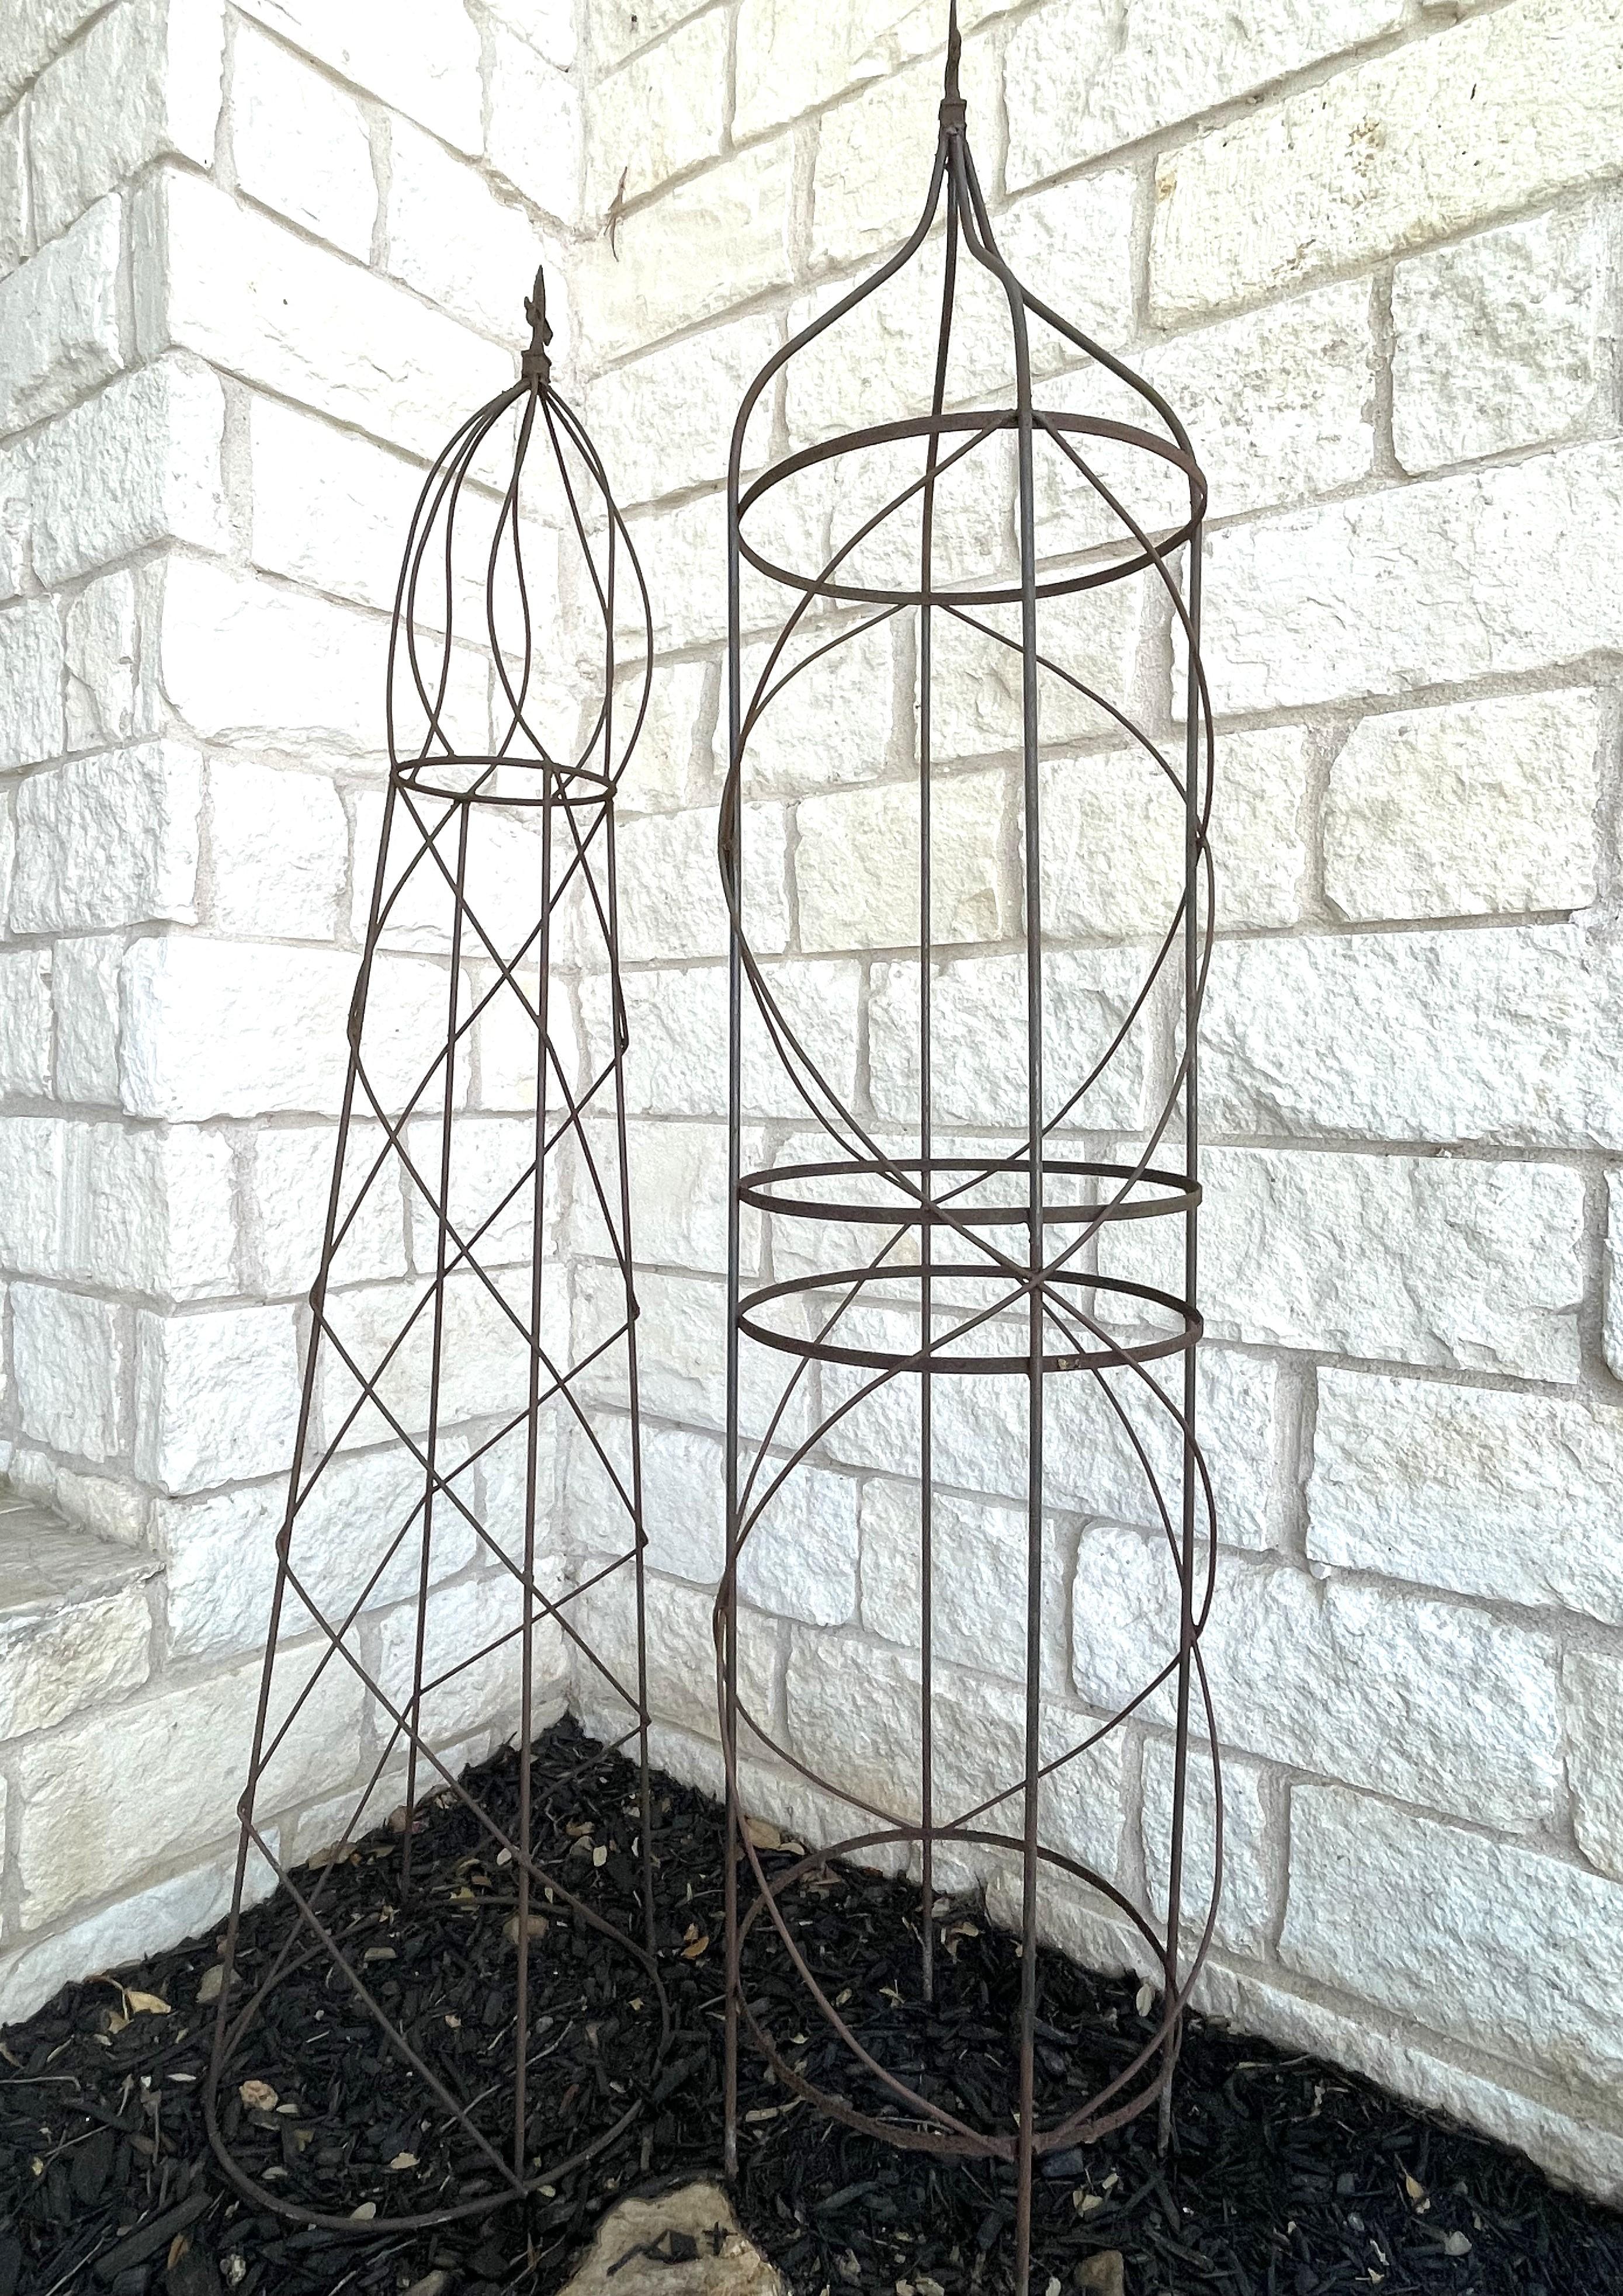 A lovely garden folly! A great vintage find. Made of iron, this pair of vintage French garden trellises or topiaries dates to the late 19th or early 20th century and has patinaed very nicely. Each trellis is solid and sturdy. They are ready to serve